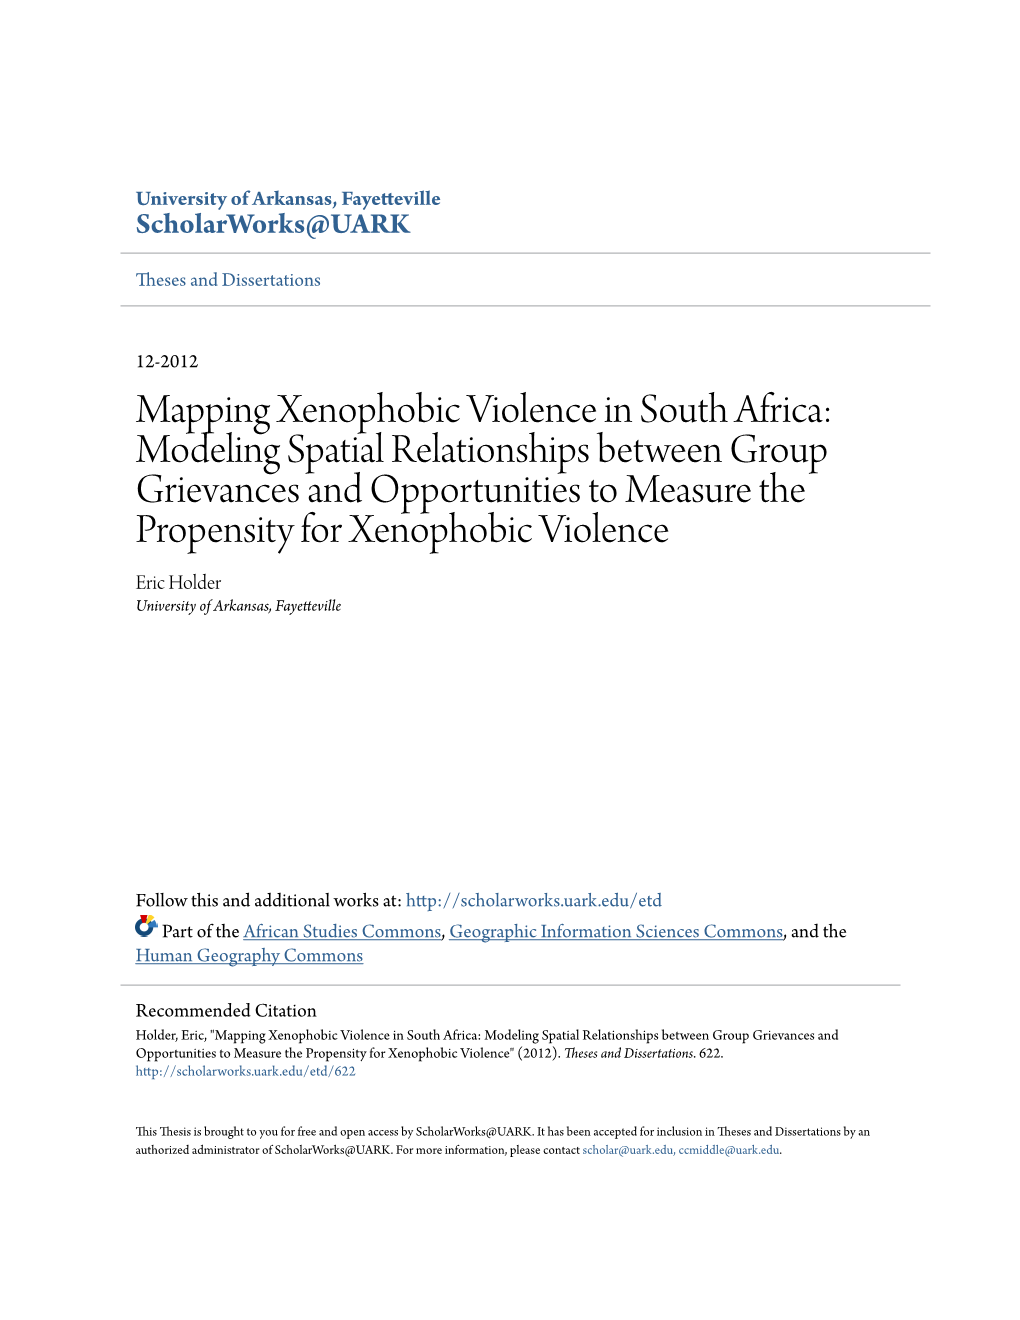 Mapping Xenophobic Violence in South Africa